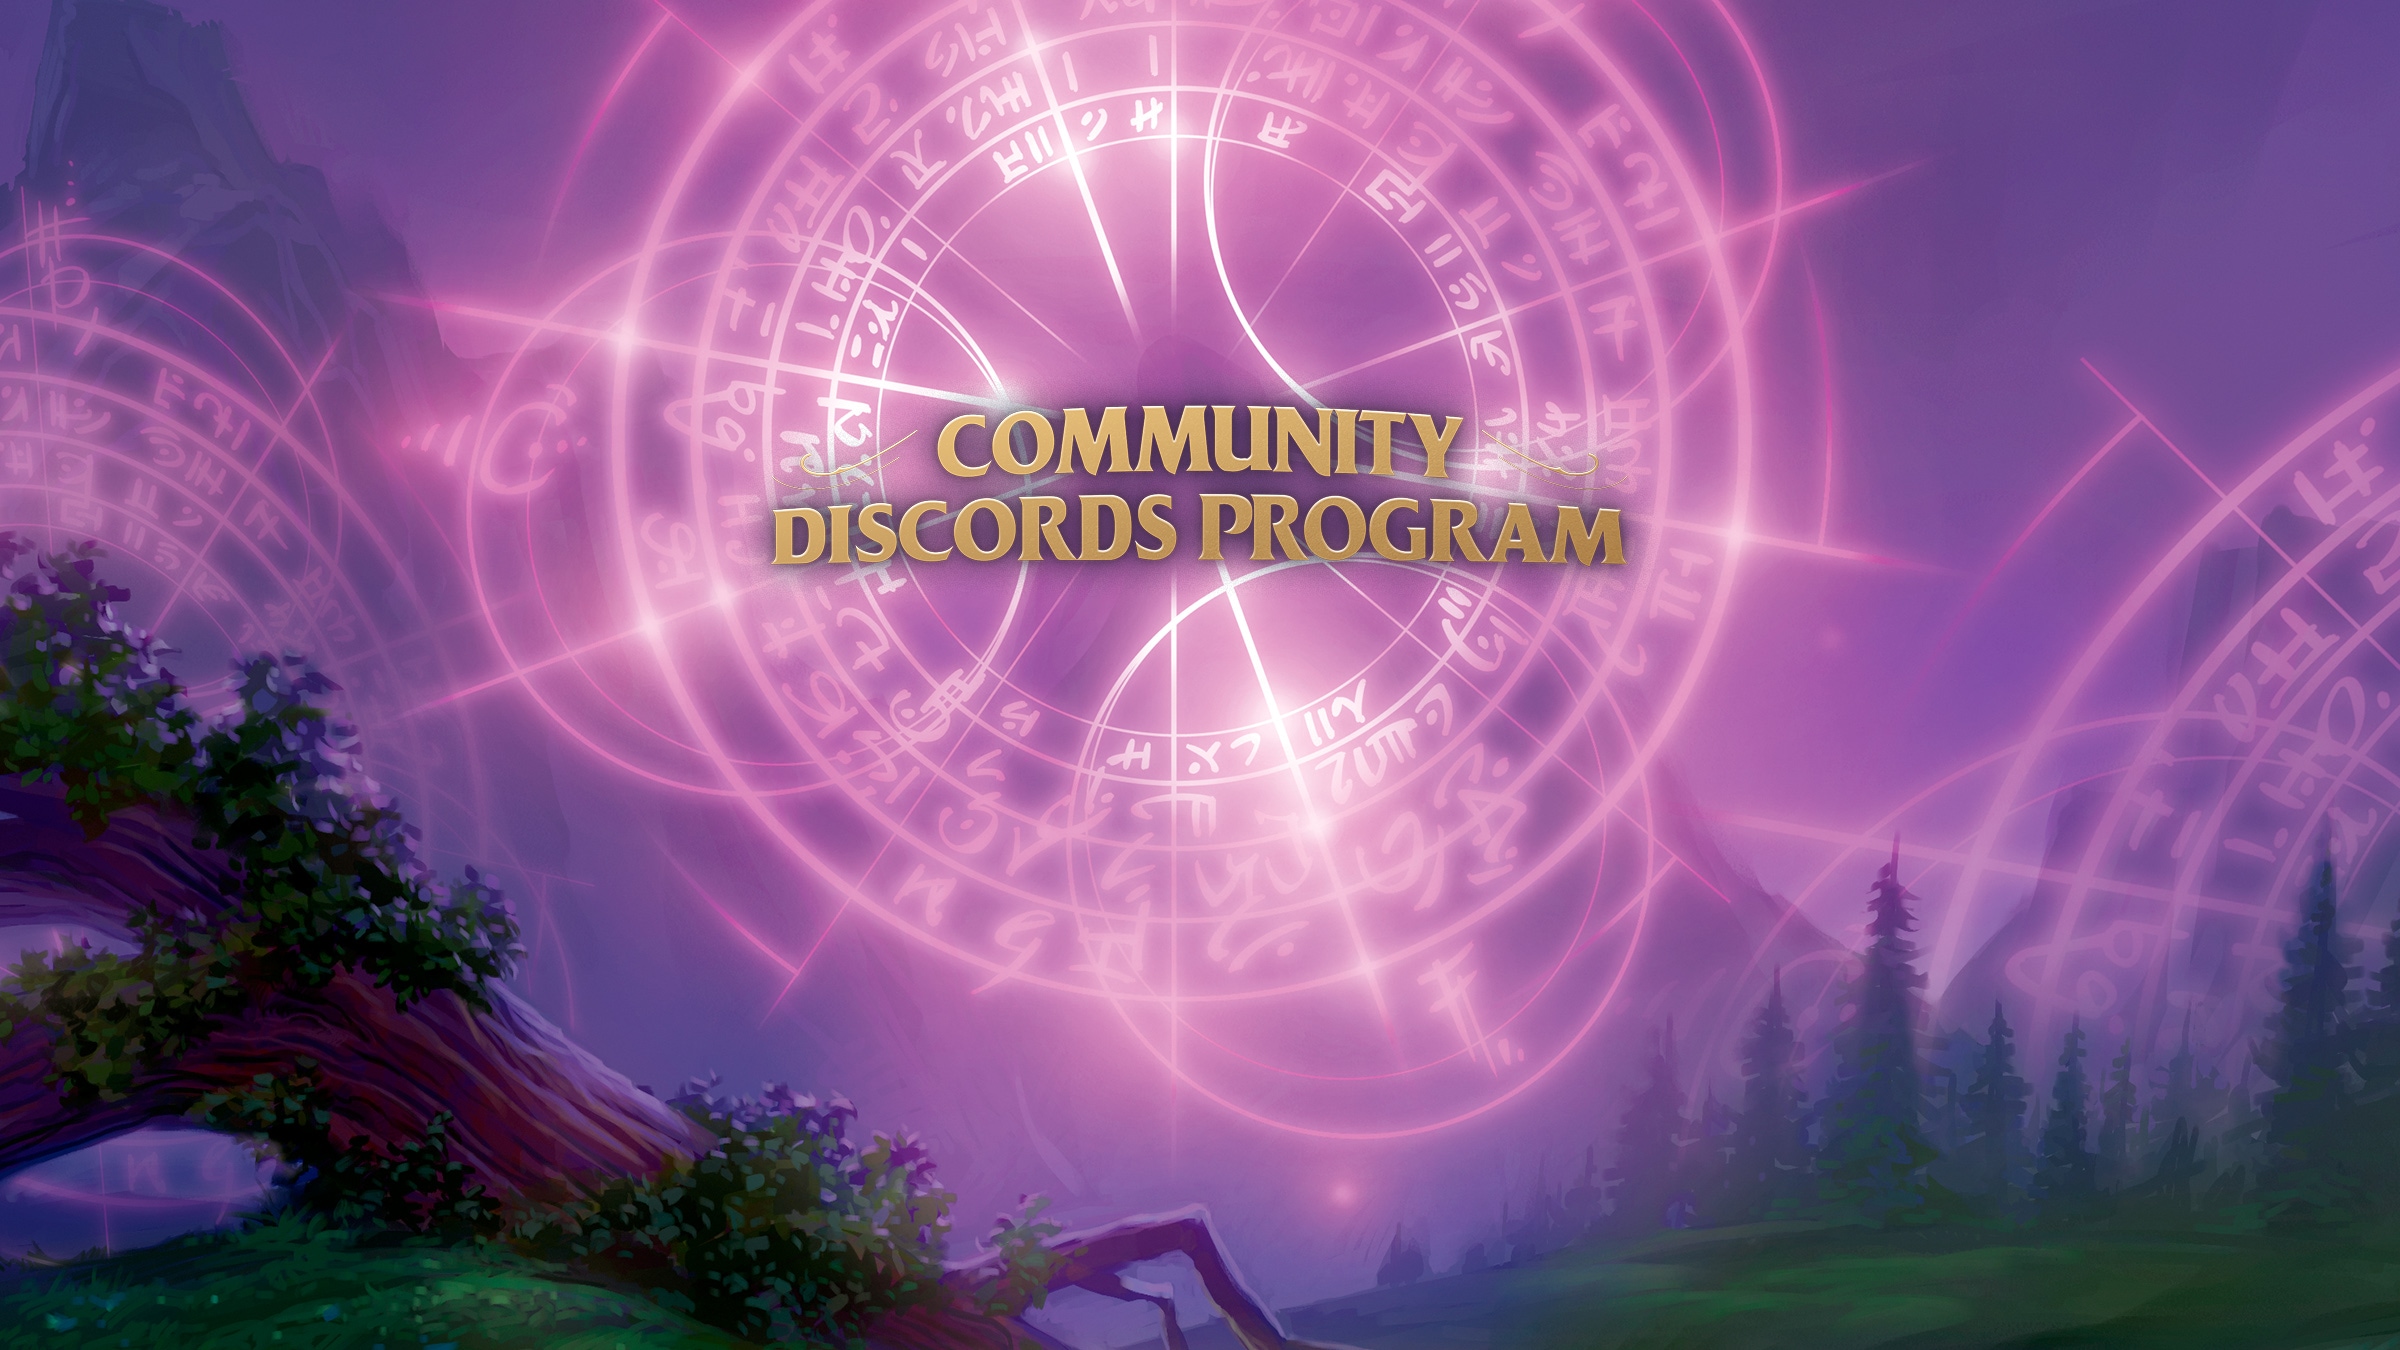 [UPDATED 8 JUNE] Introducing the Community Discords Program!